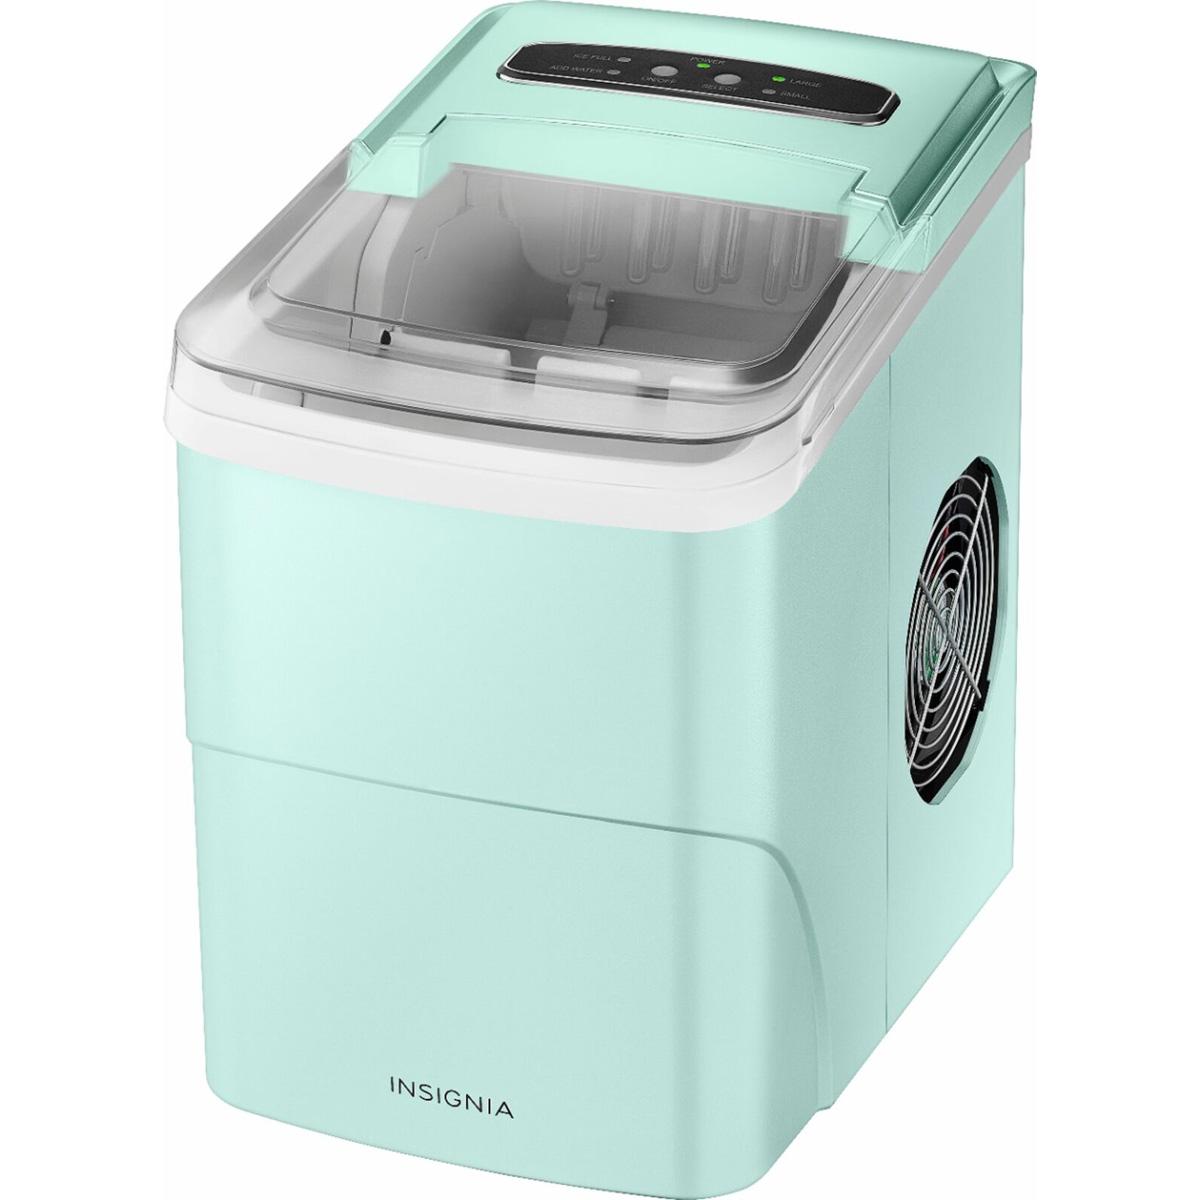 Insignia Portable Ice Maker with 2 Cube Sizes for $49.99 Shipped